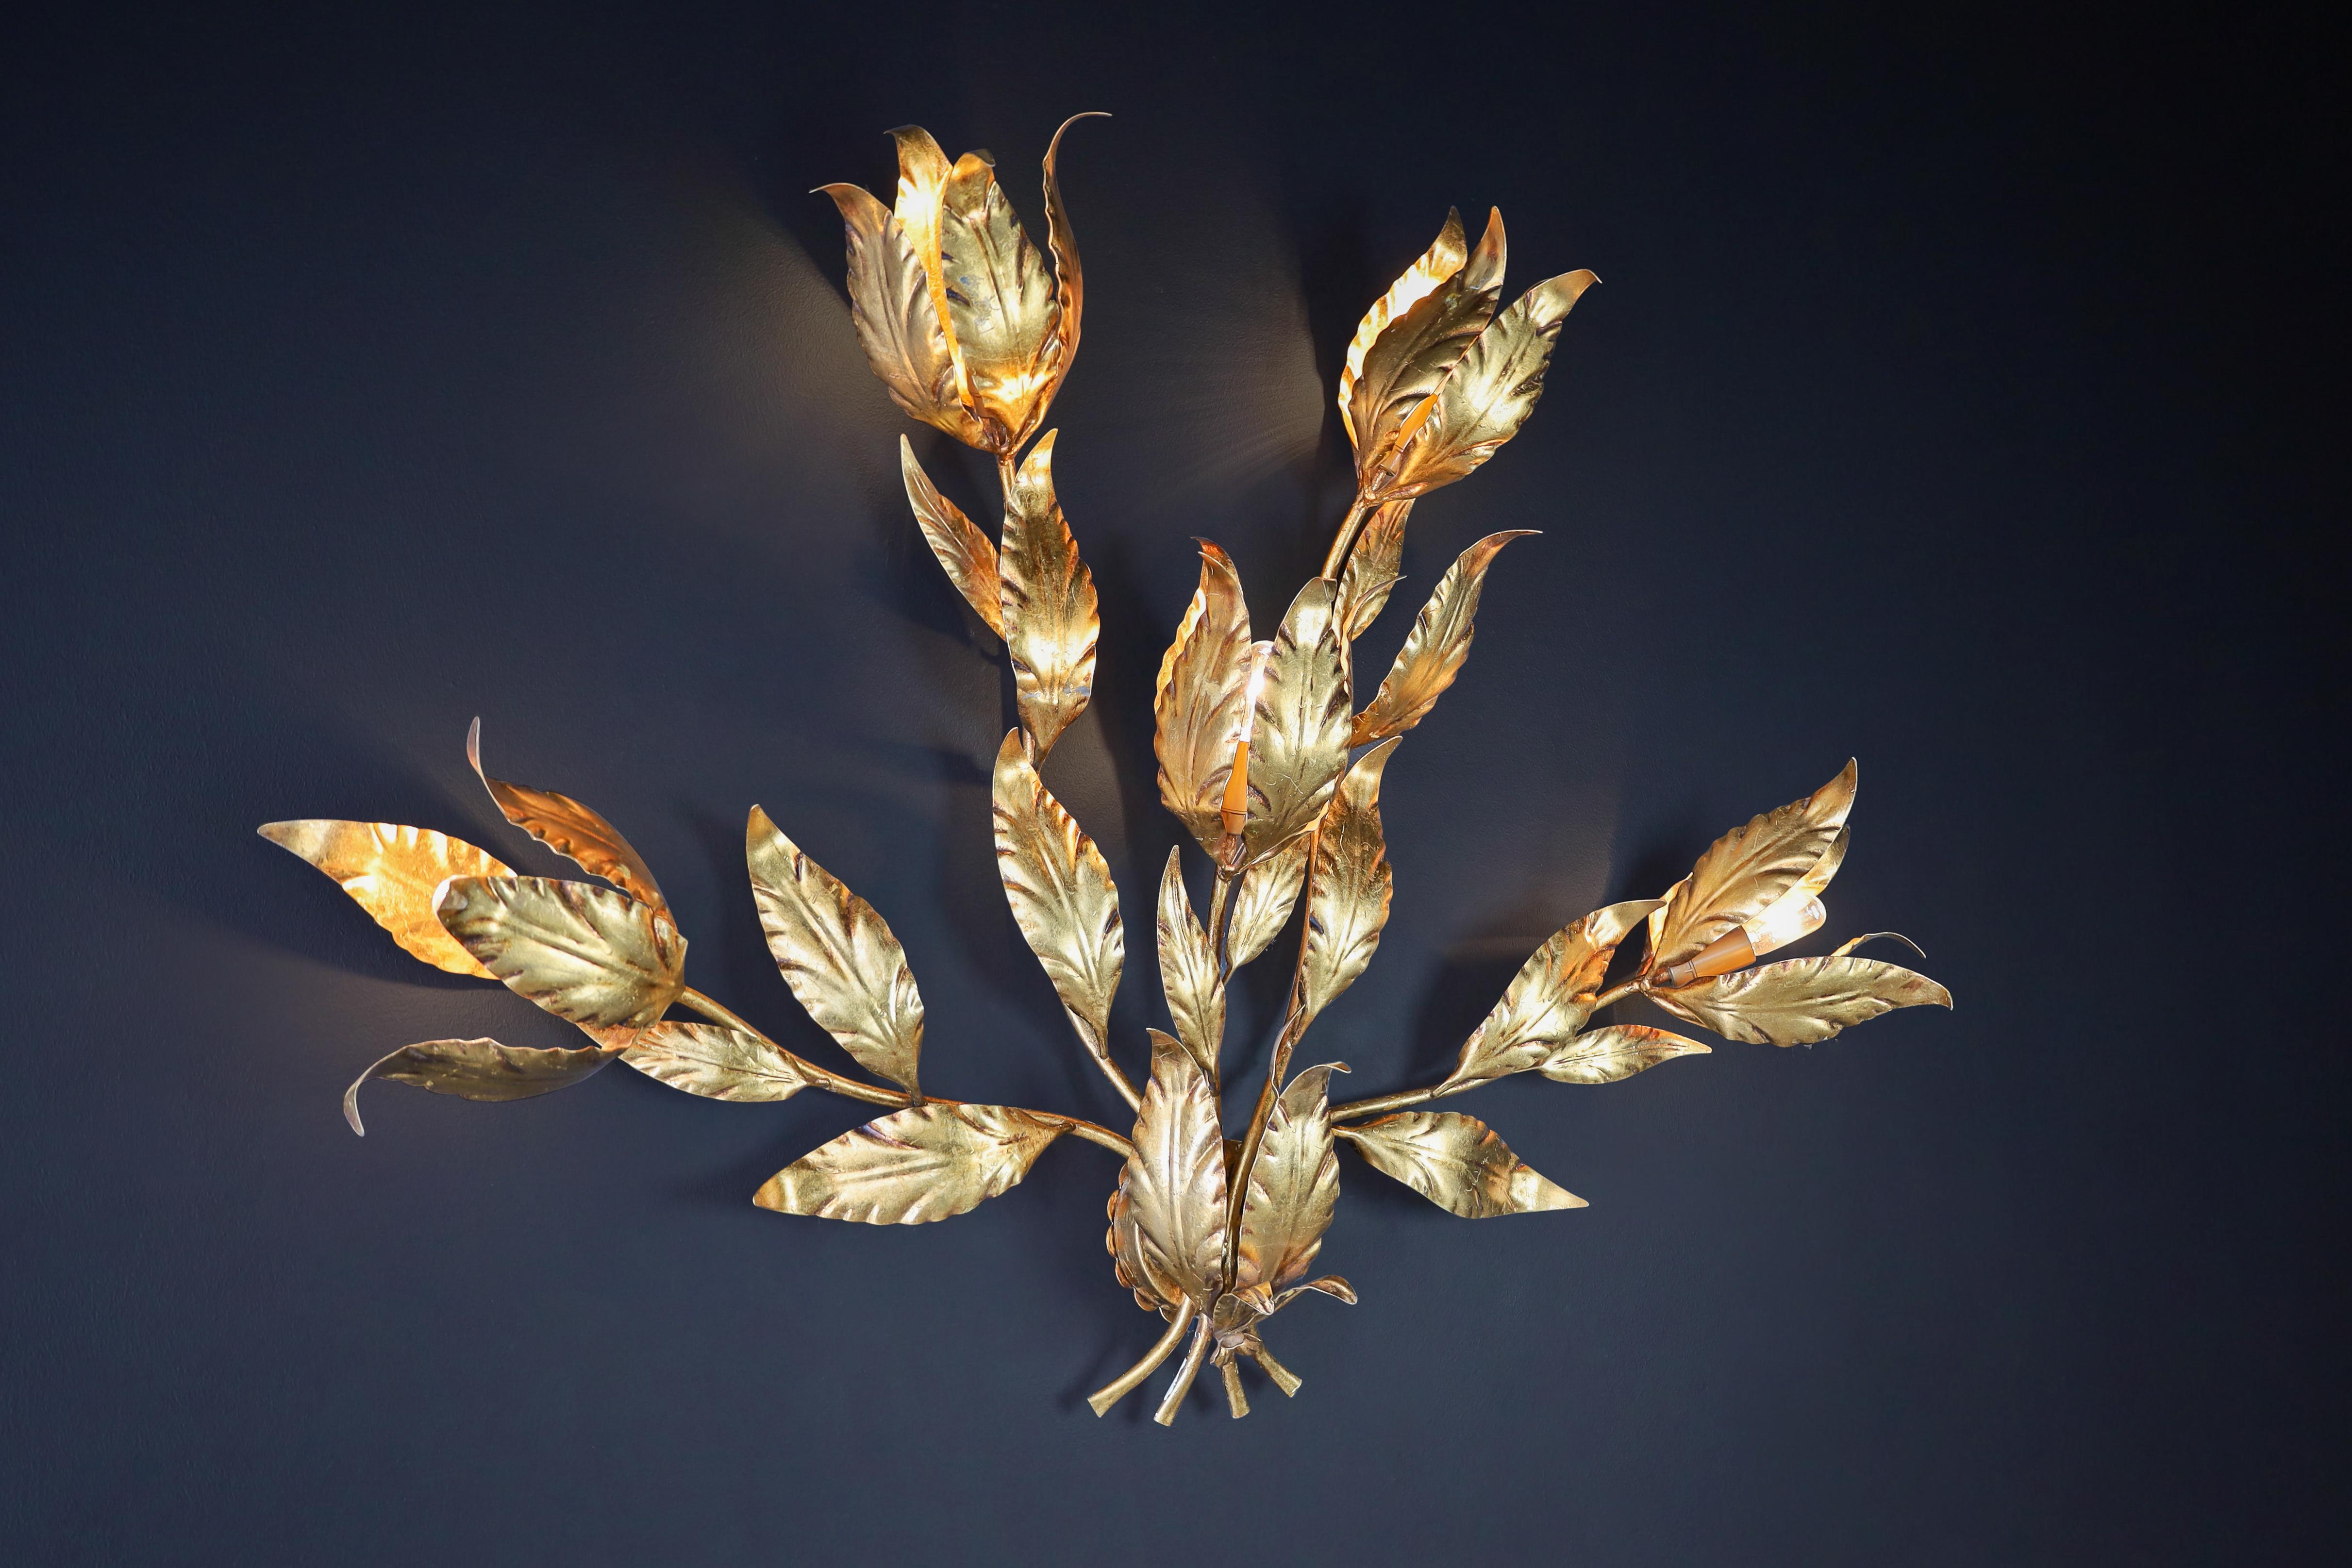 Hans Kögl Gilded Metal Floral Leaf Monumental Wall Sconce, Germany 1970s

This is a monumental wall sconce designed by Hans Kögl in Germany. It features branches and leaves that hold five light bulbs, making it an impressive and high-quality piece